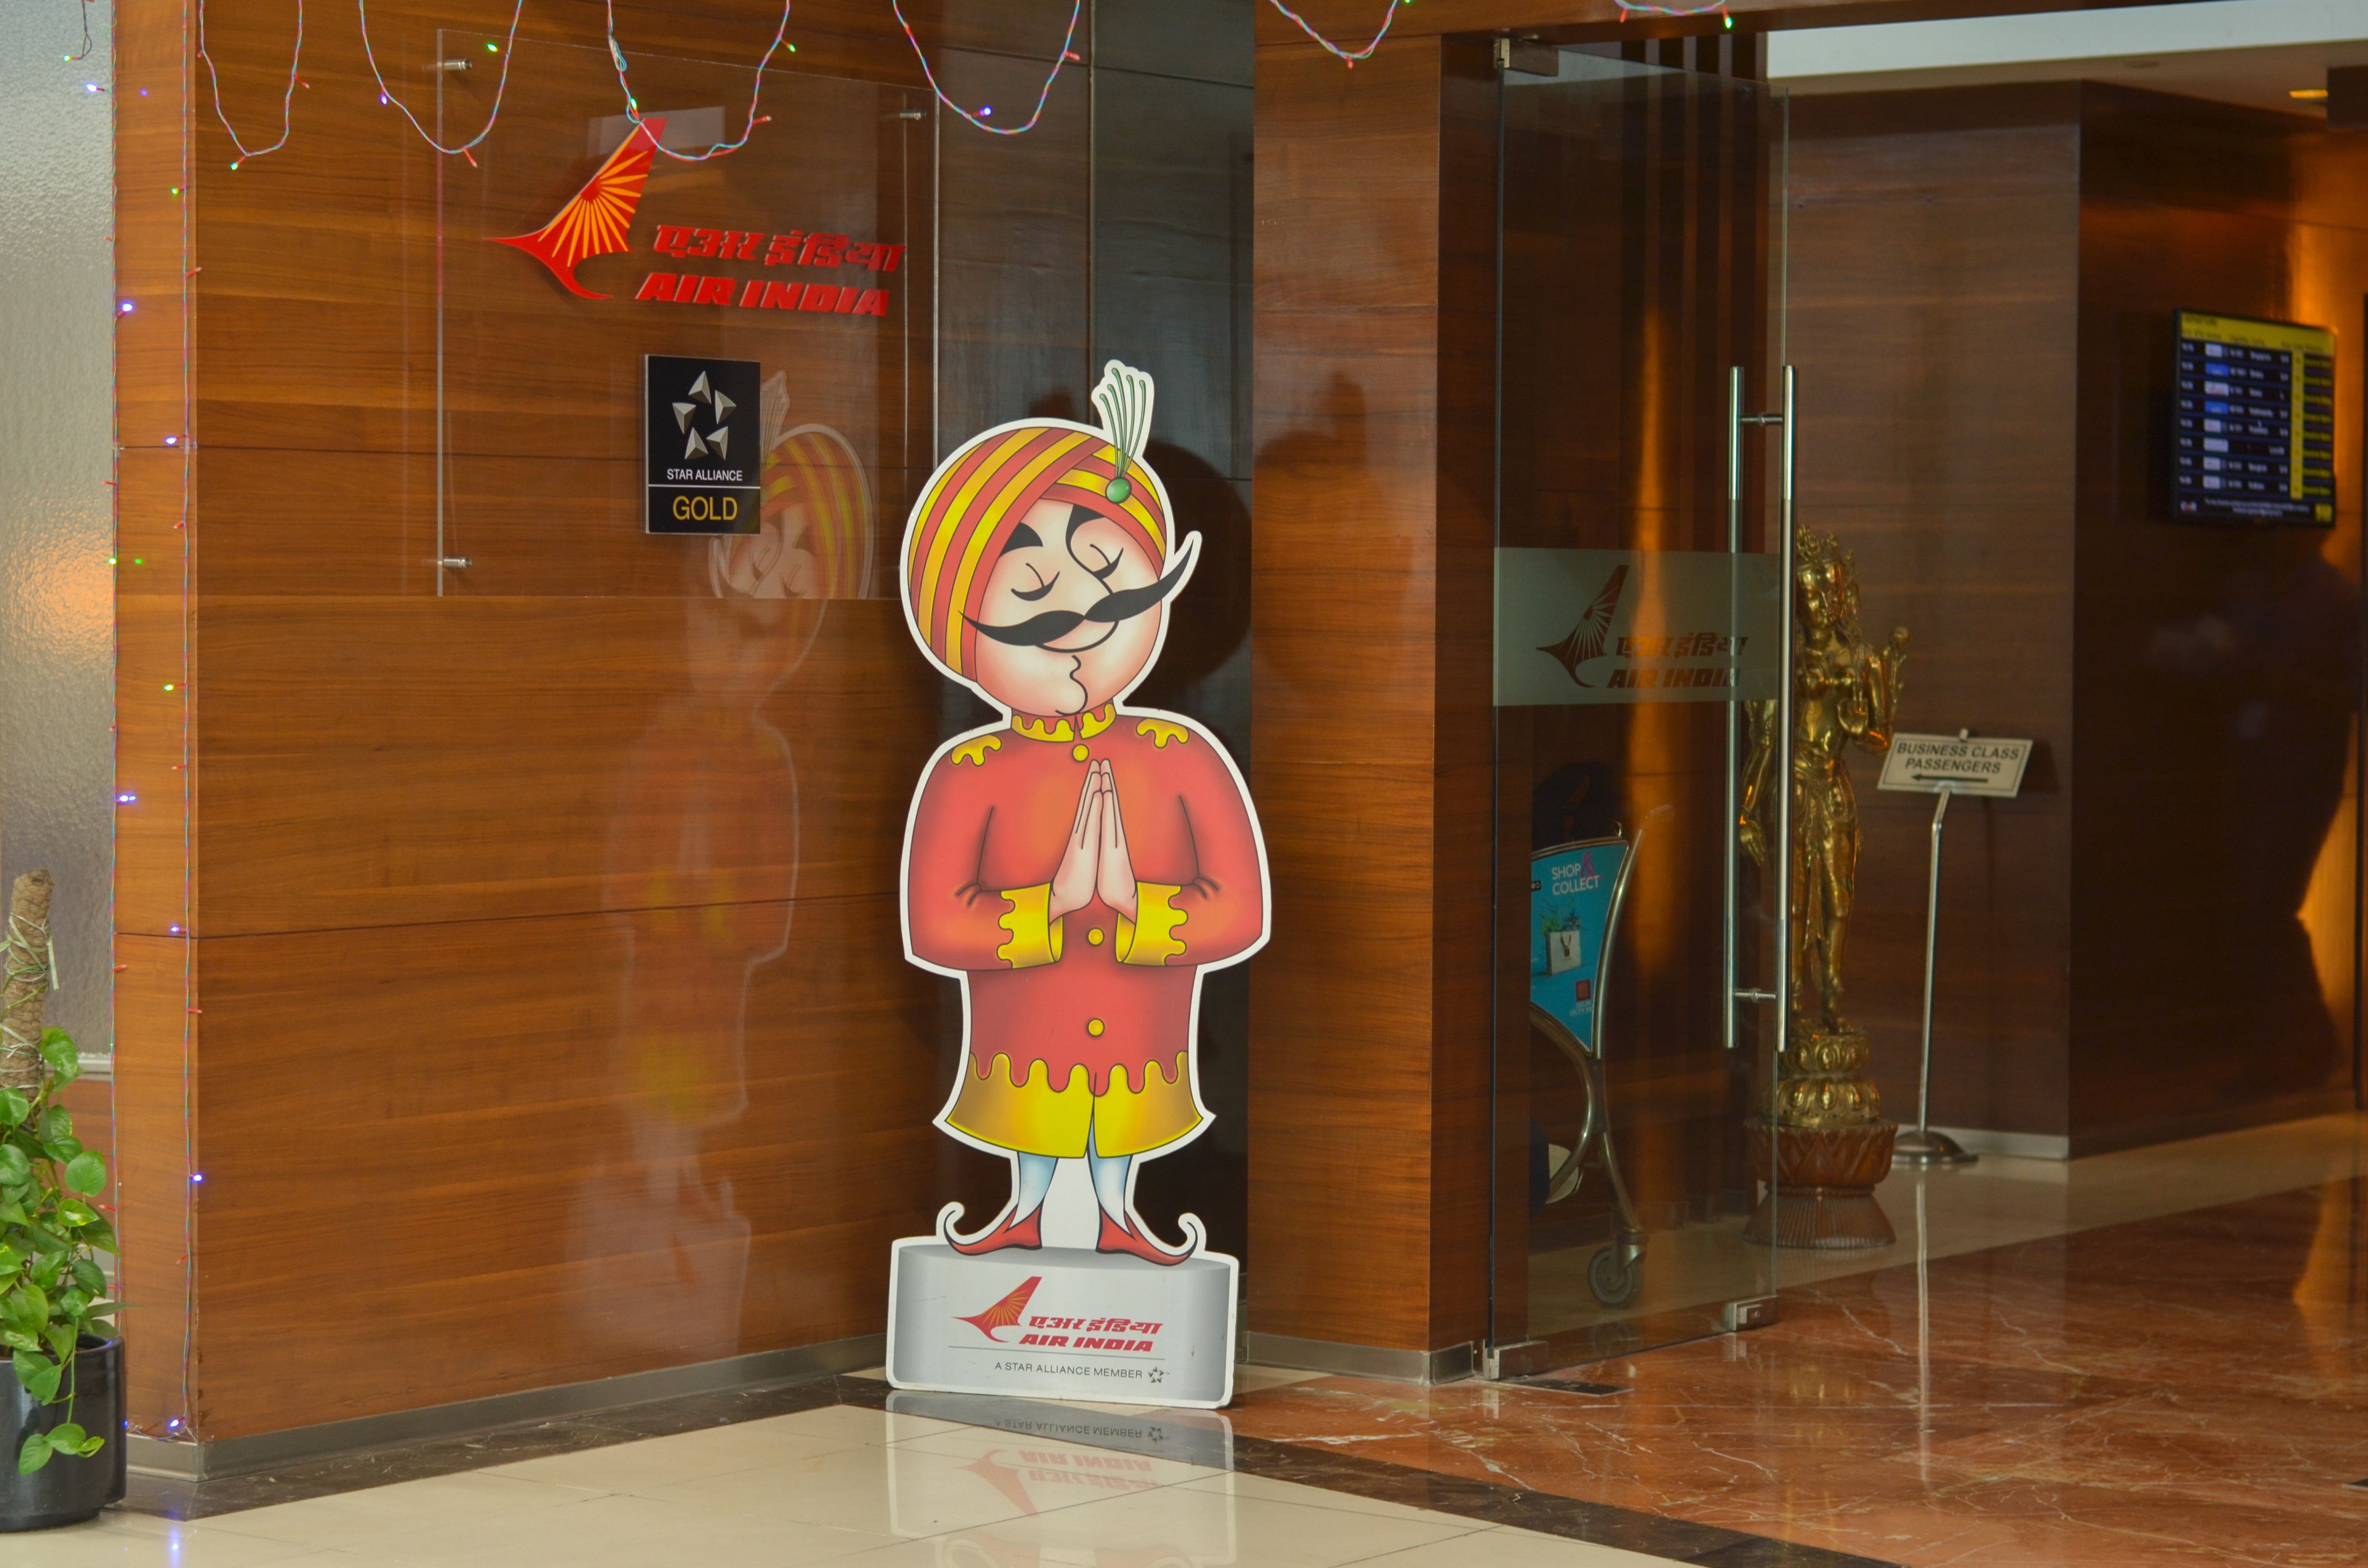 The entrance to an Air India lounge.